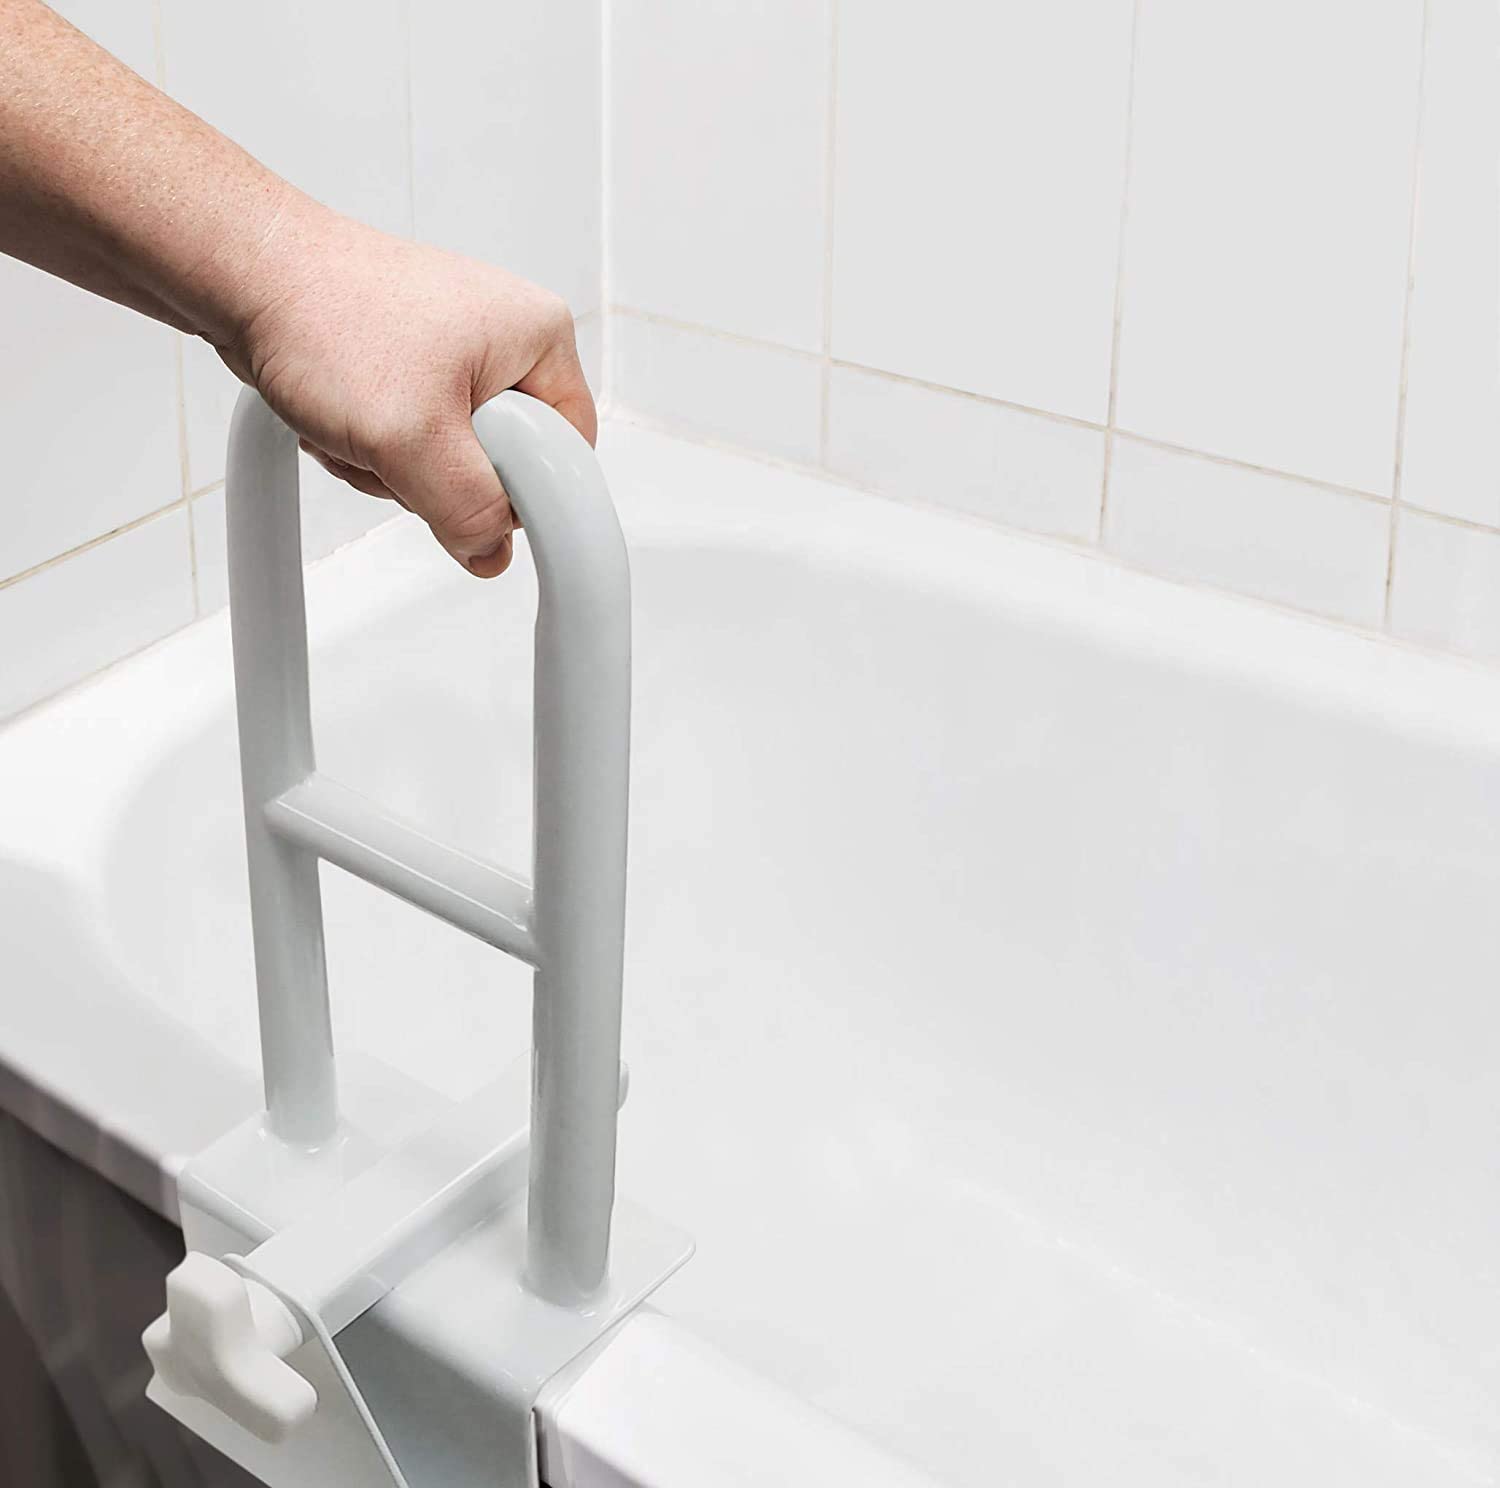 A hand grasps a grab-bar that is clamped to the side of a tub.